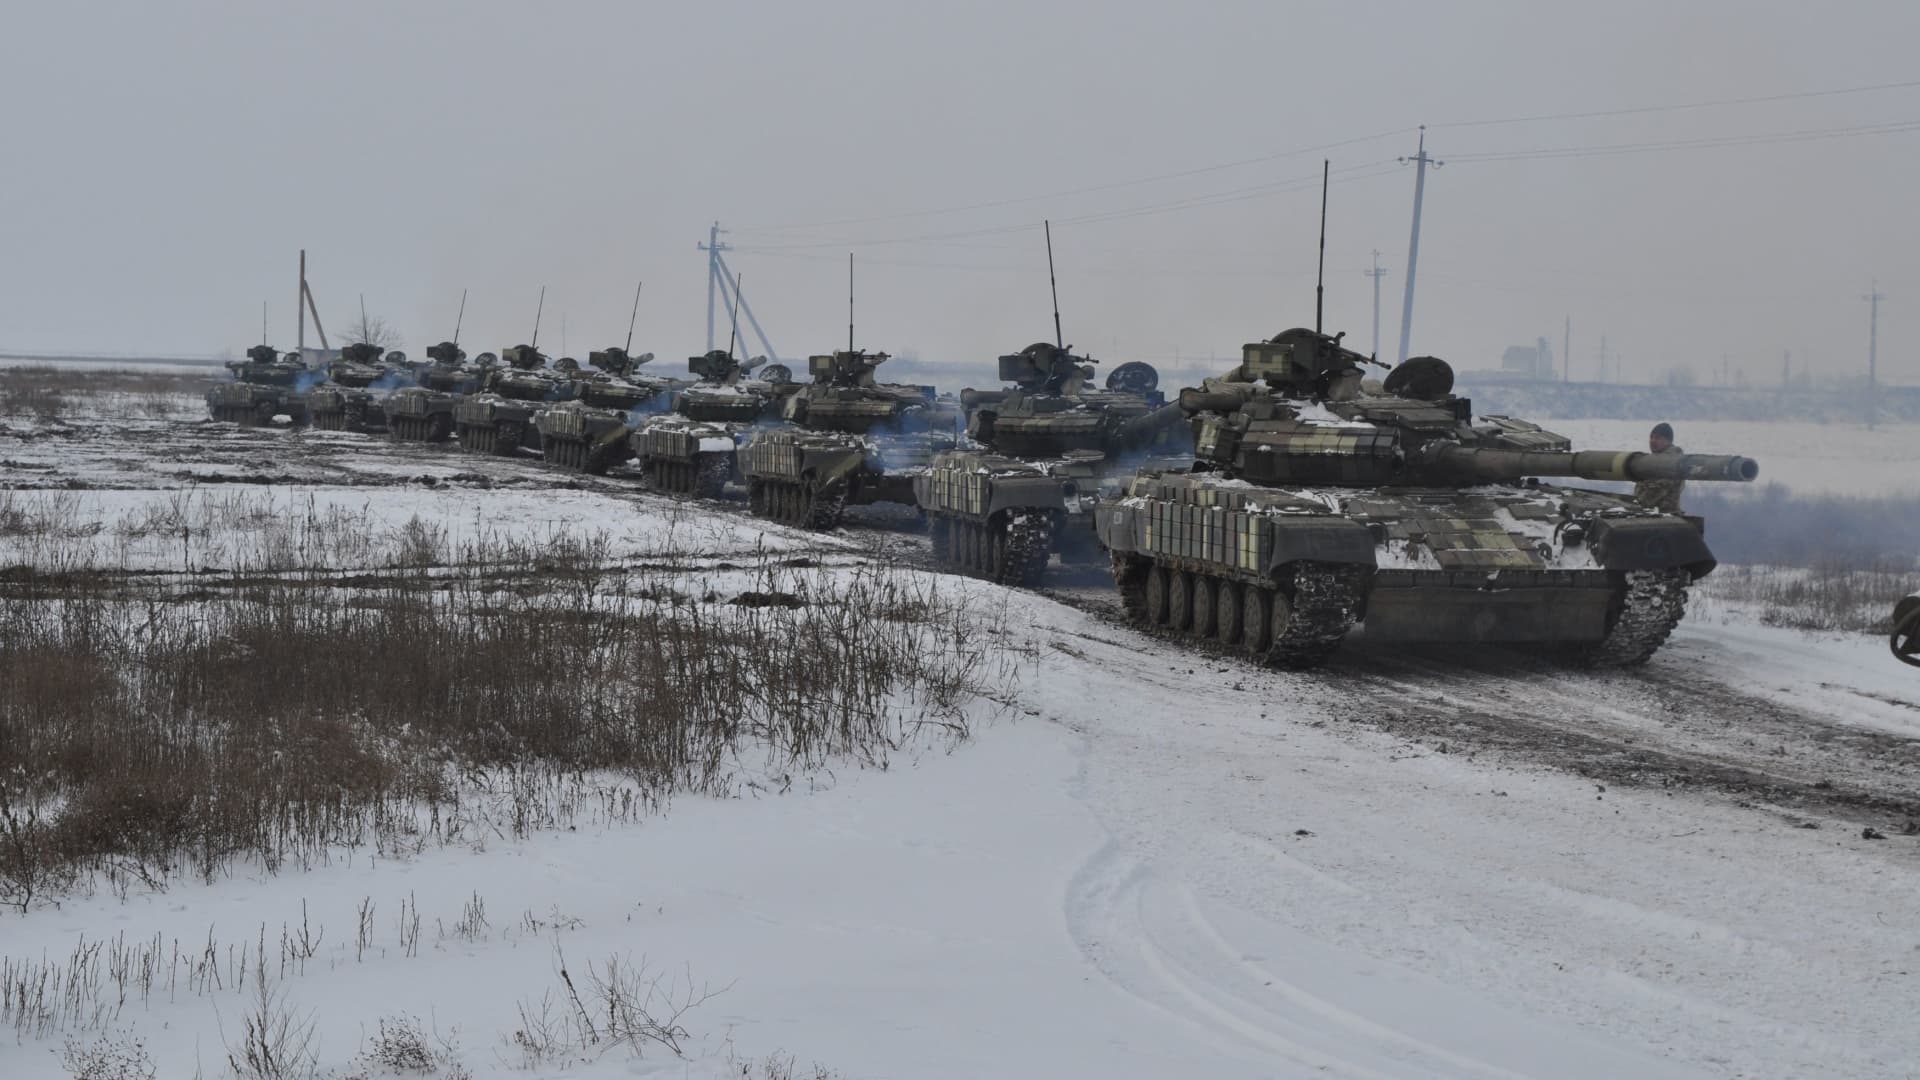 Ukrainian tanks drive during tactical drills at a training ground in the Kherson region, Ukraine, in this handout picture released February 7, 2022.